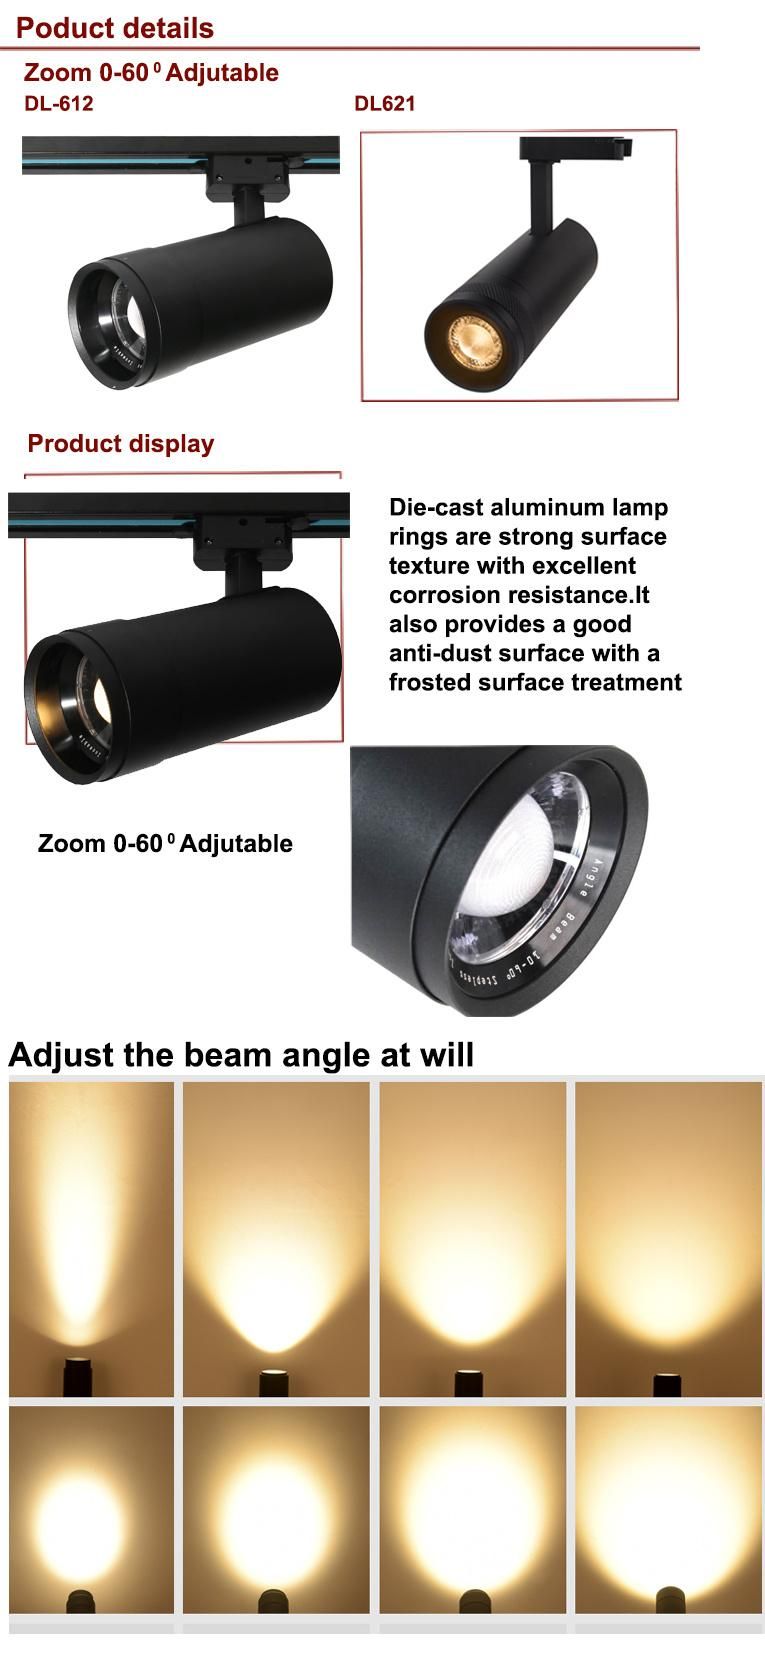 Tri-CCT Dimmable Beam Angle Adjustable 20W LED Zoom Track Light Dali Dimmable Track Light for Museum, Showcase, Shopping Mall